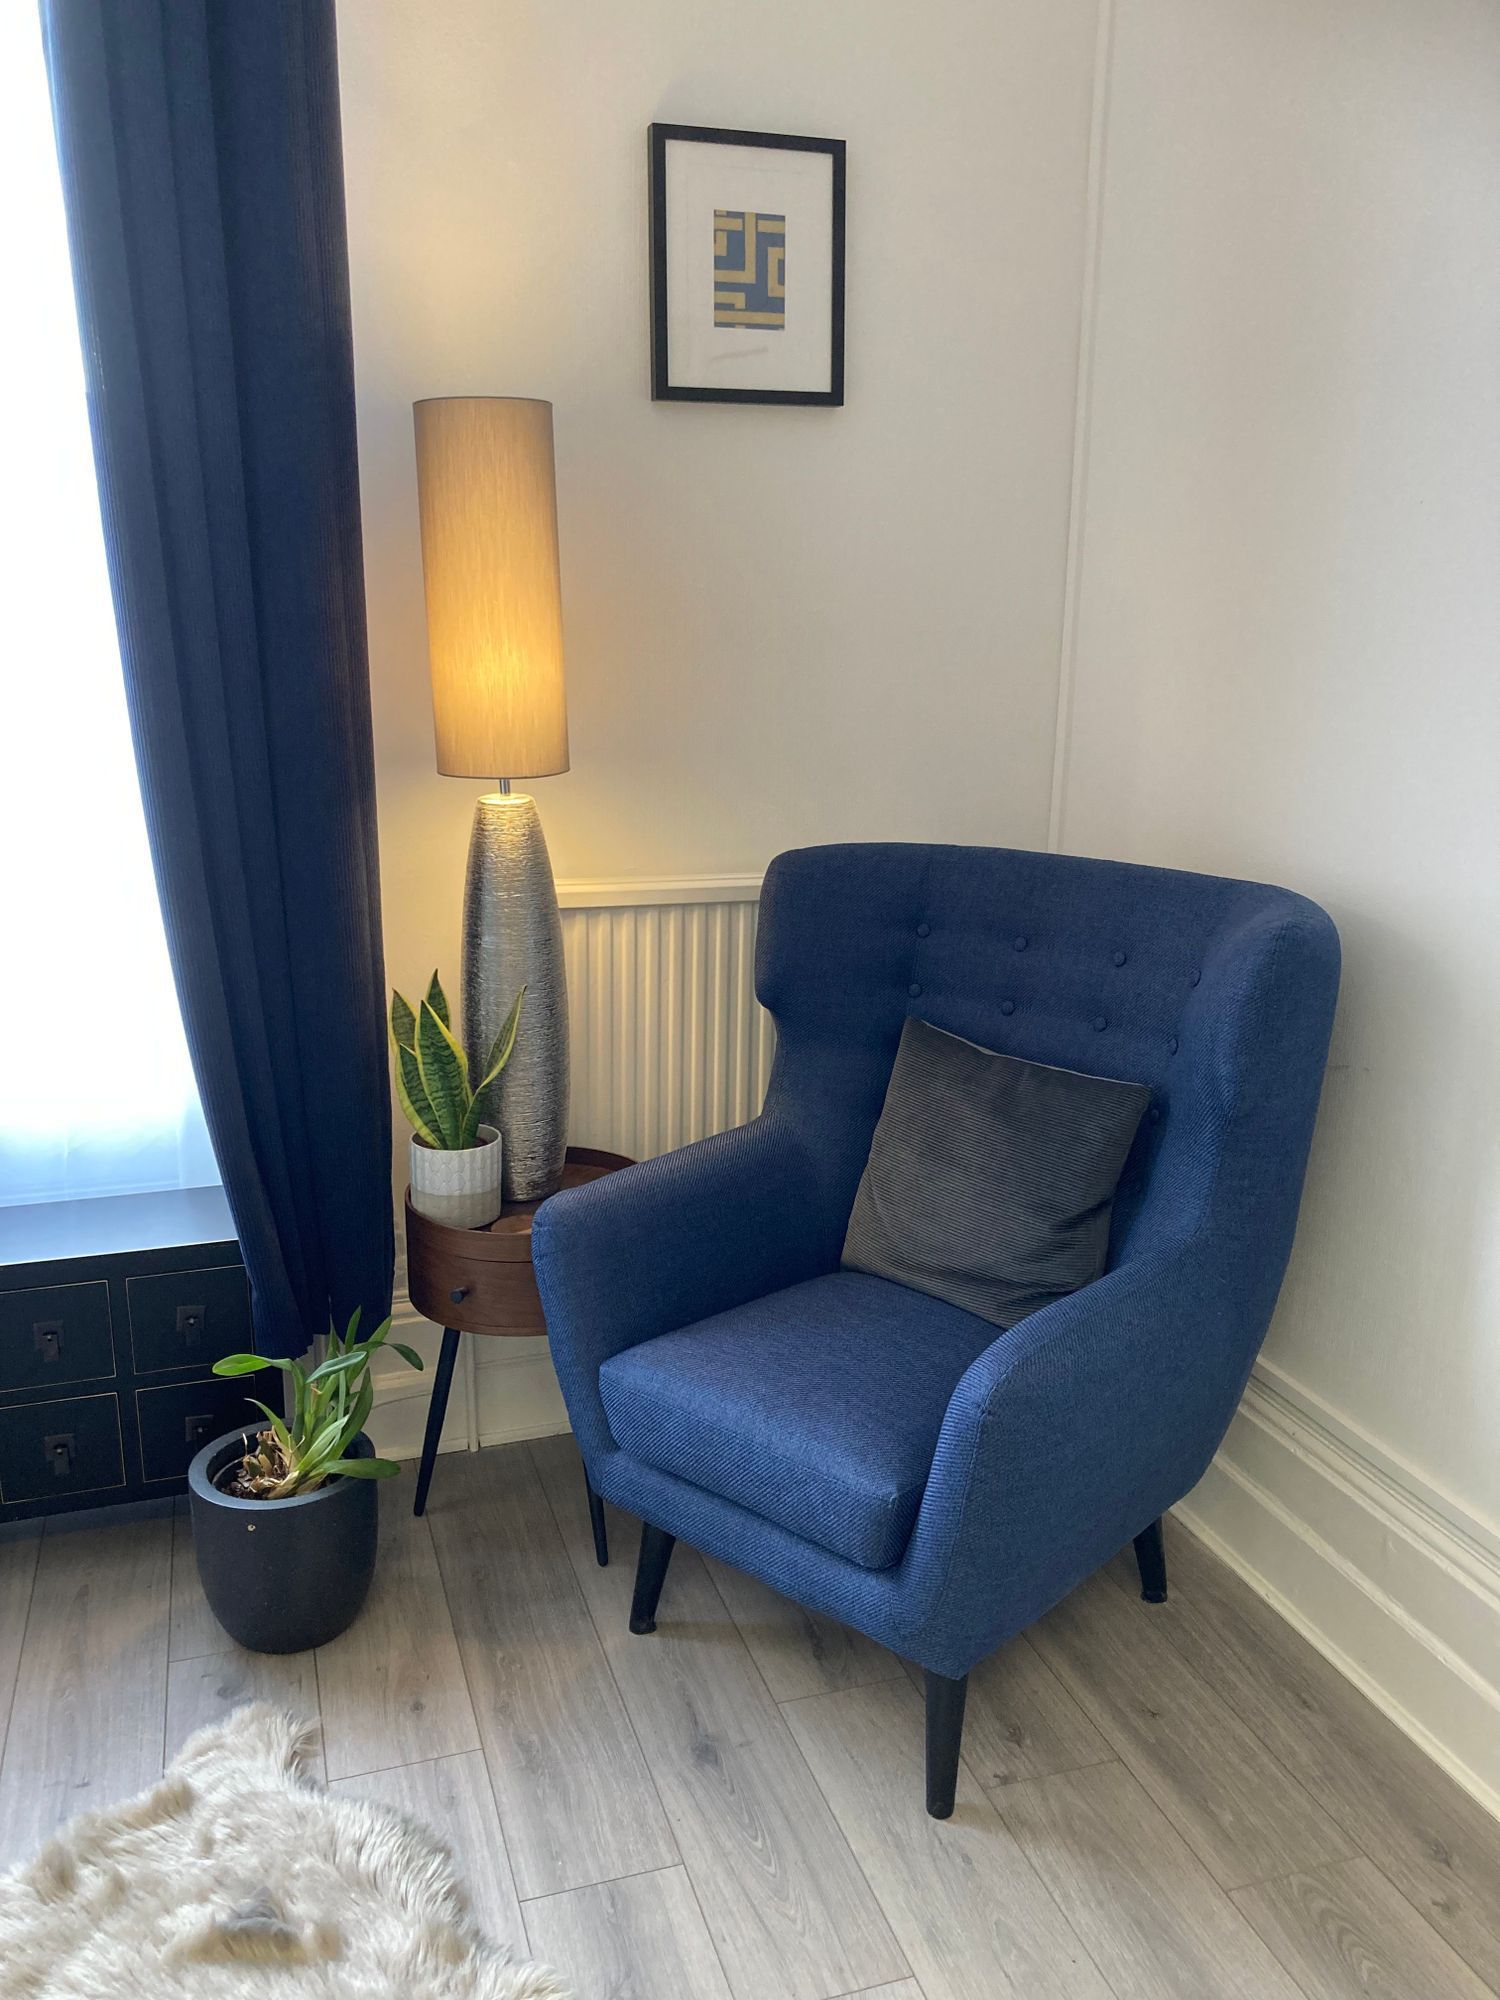 Gallery Photo of Counselling in a safe, confidential and caring space in Surbiton.